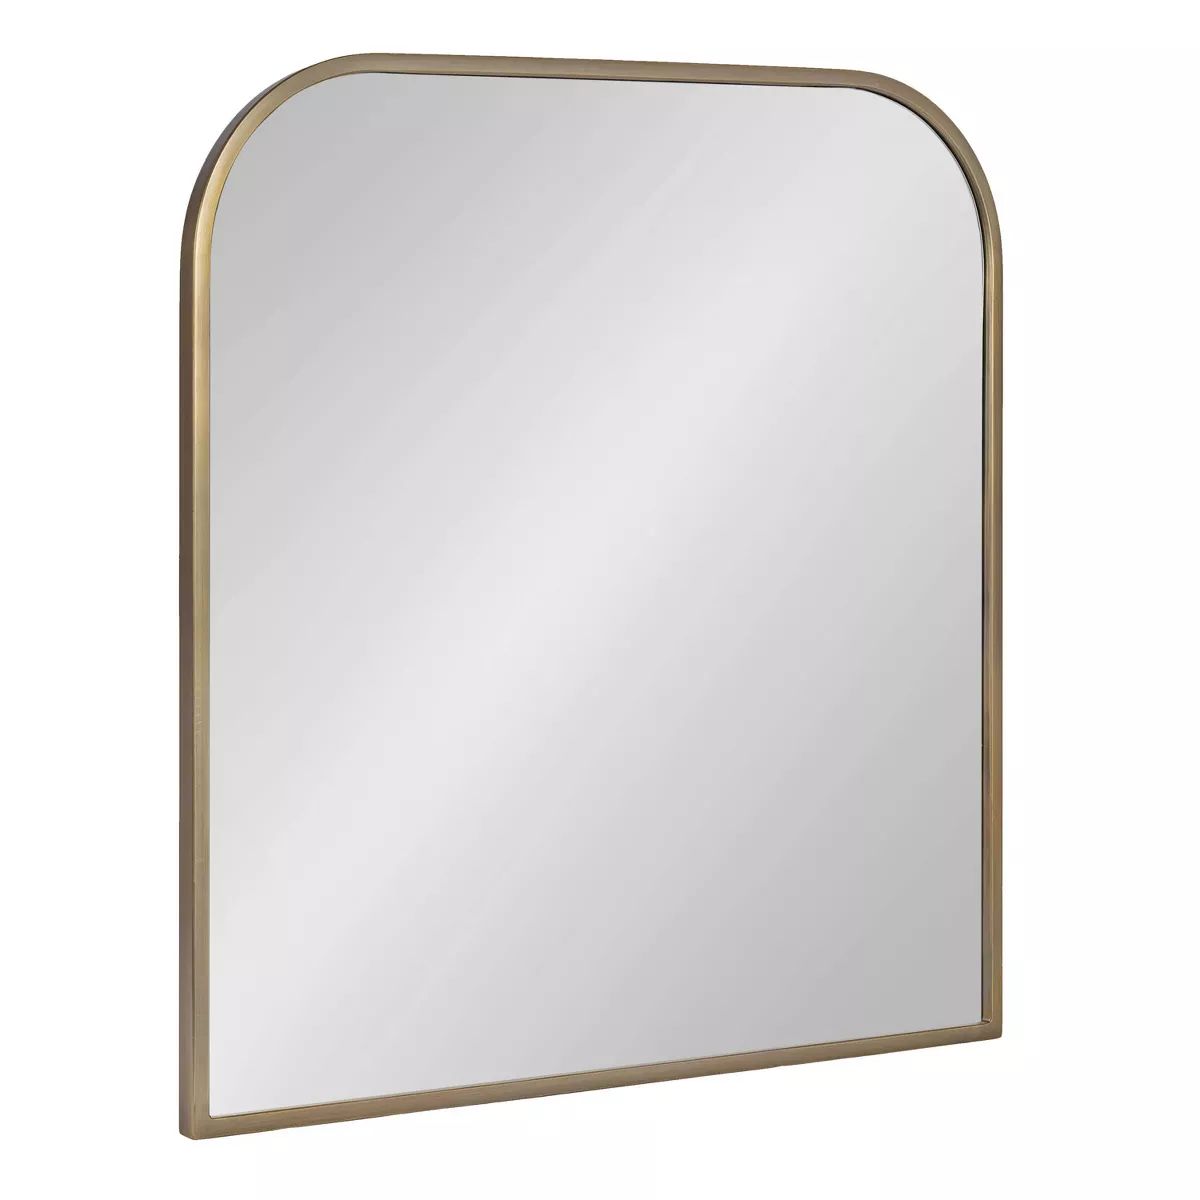 Kate & Laurel All Things Decor Valenti Wide Arch Wall Mirror | Target